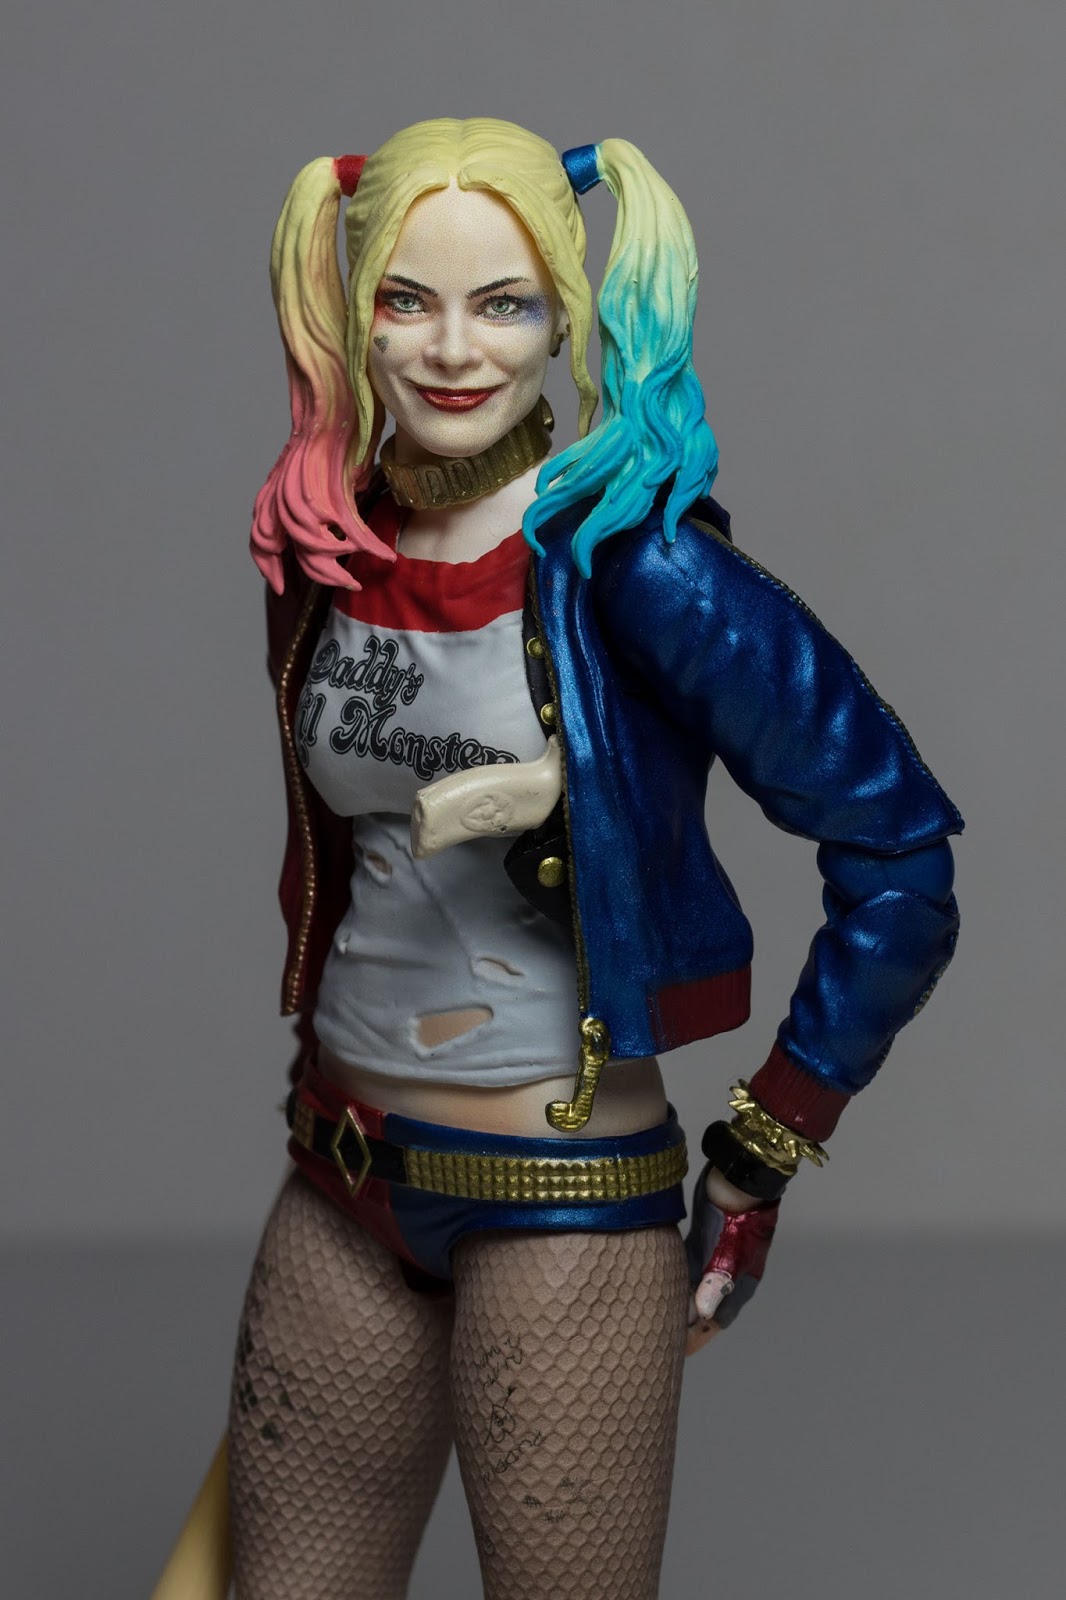 Harley Quinn Action Figure Shfiguarts Model Collectible 3 Heads Dc